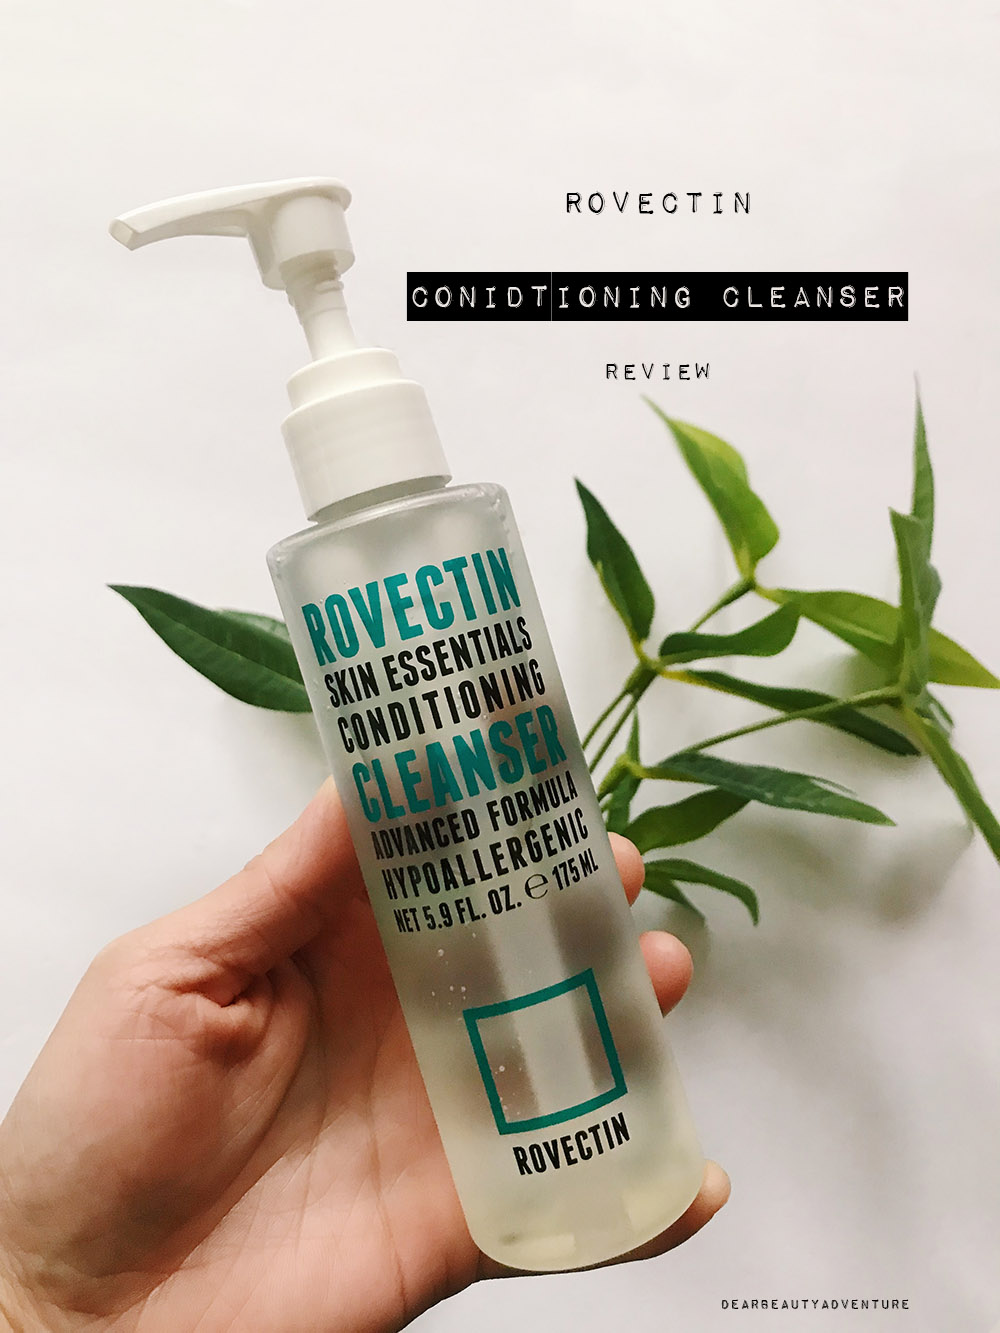 Rovectin Conditioning Cleanser